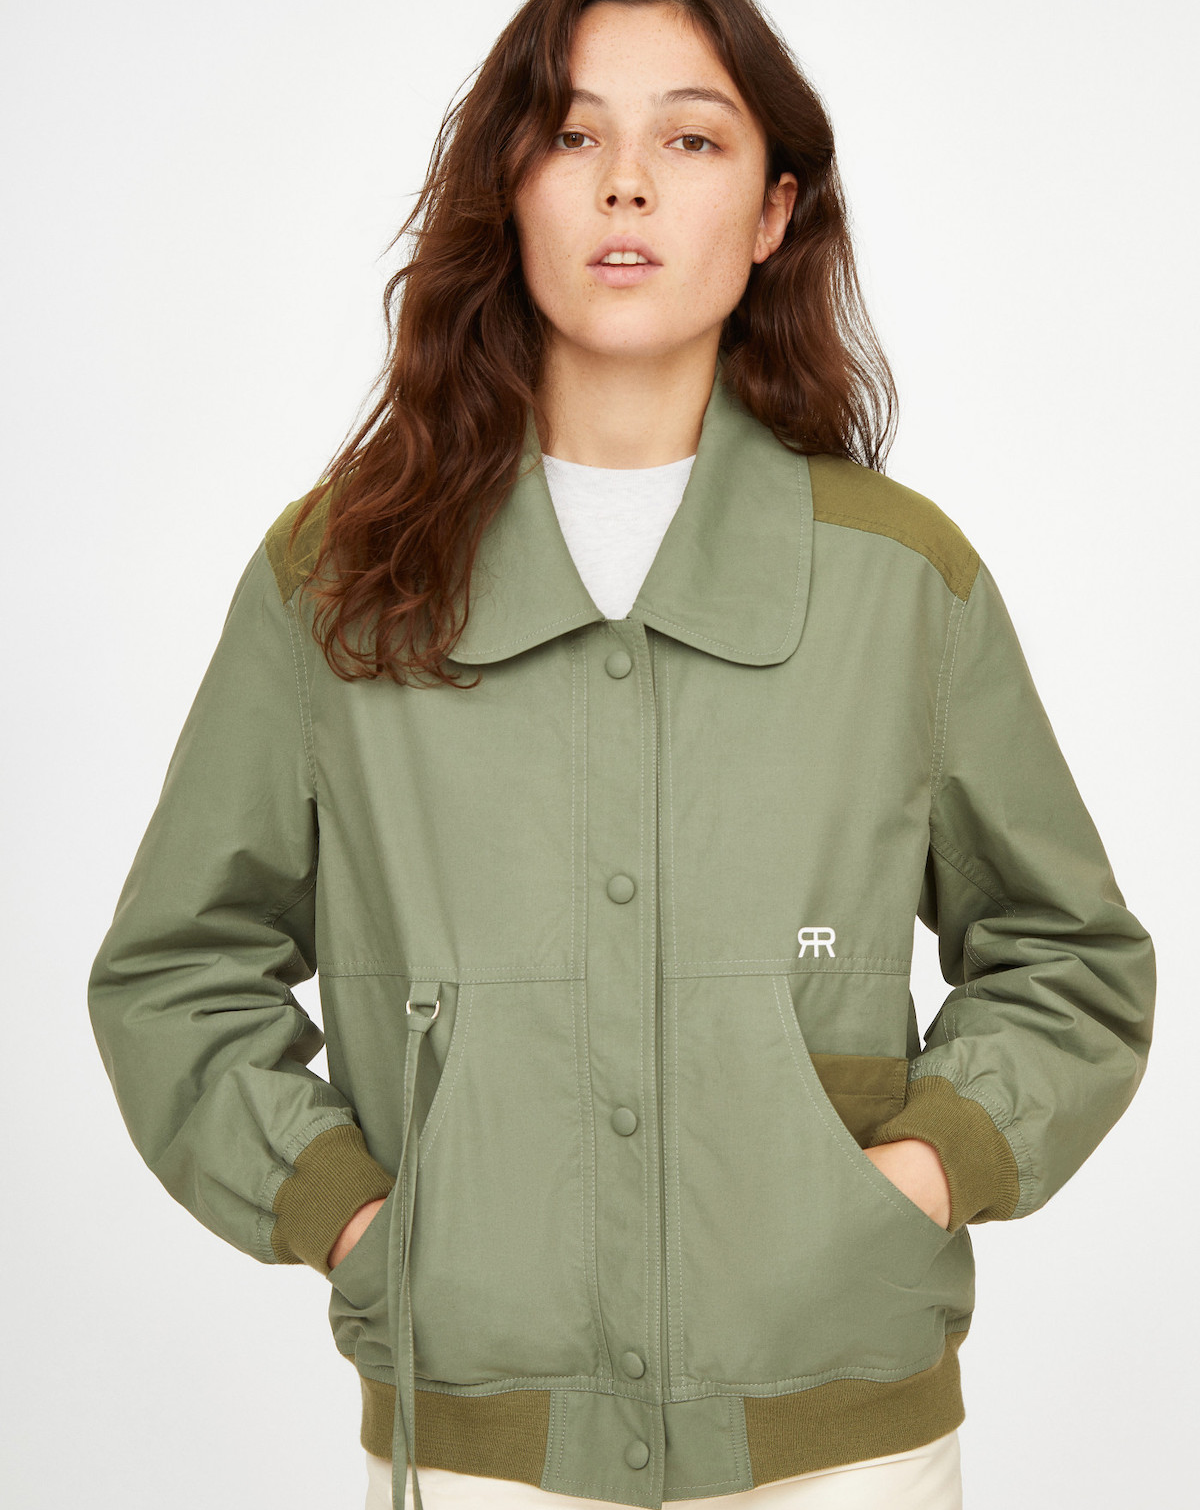 Roseanna Power Pioggia Jacket Olive - 100% Sisters Concept Store